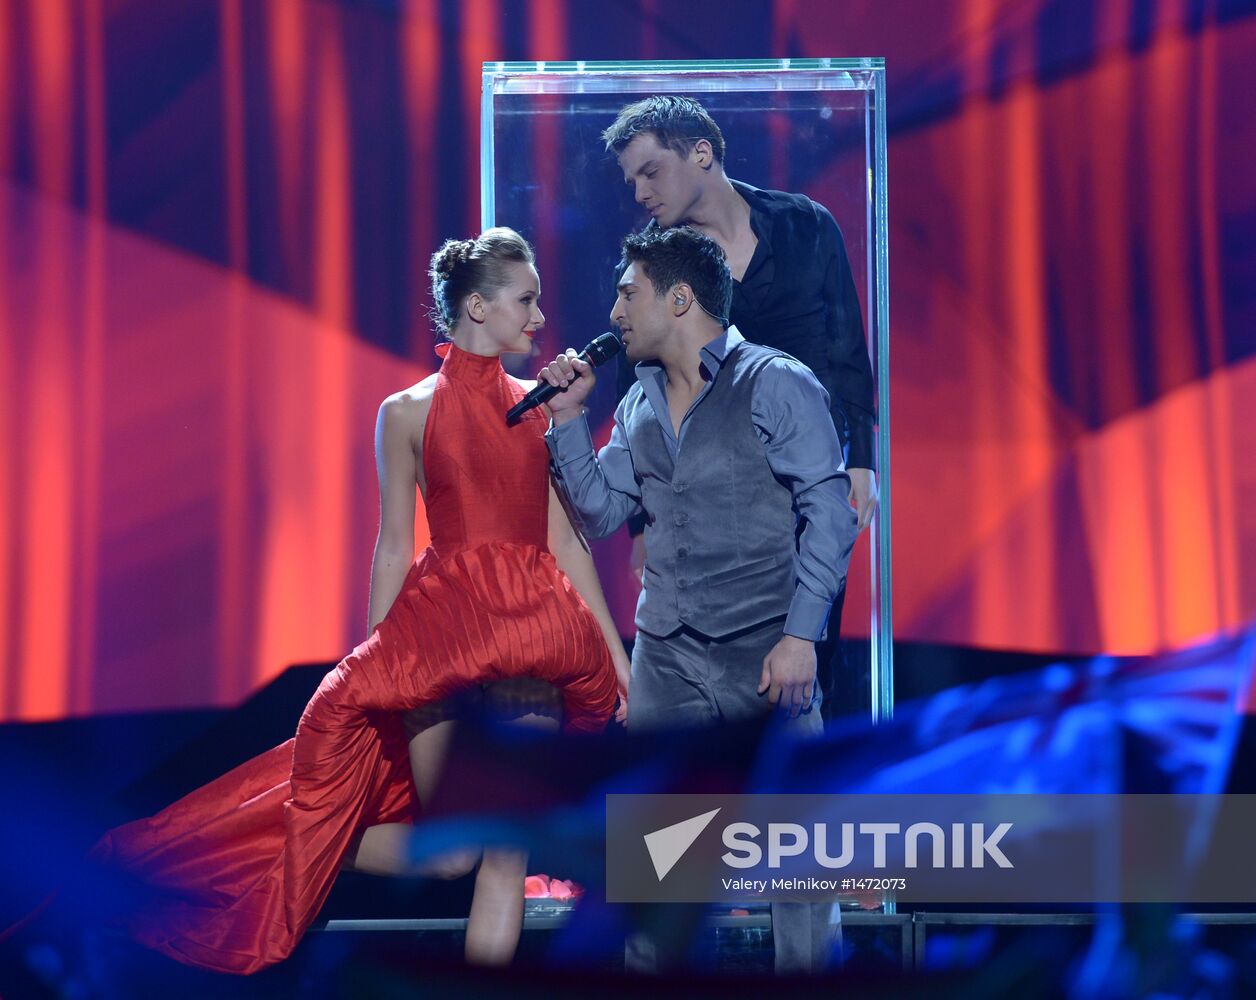 Finals of Eurovision-2013 international song contest